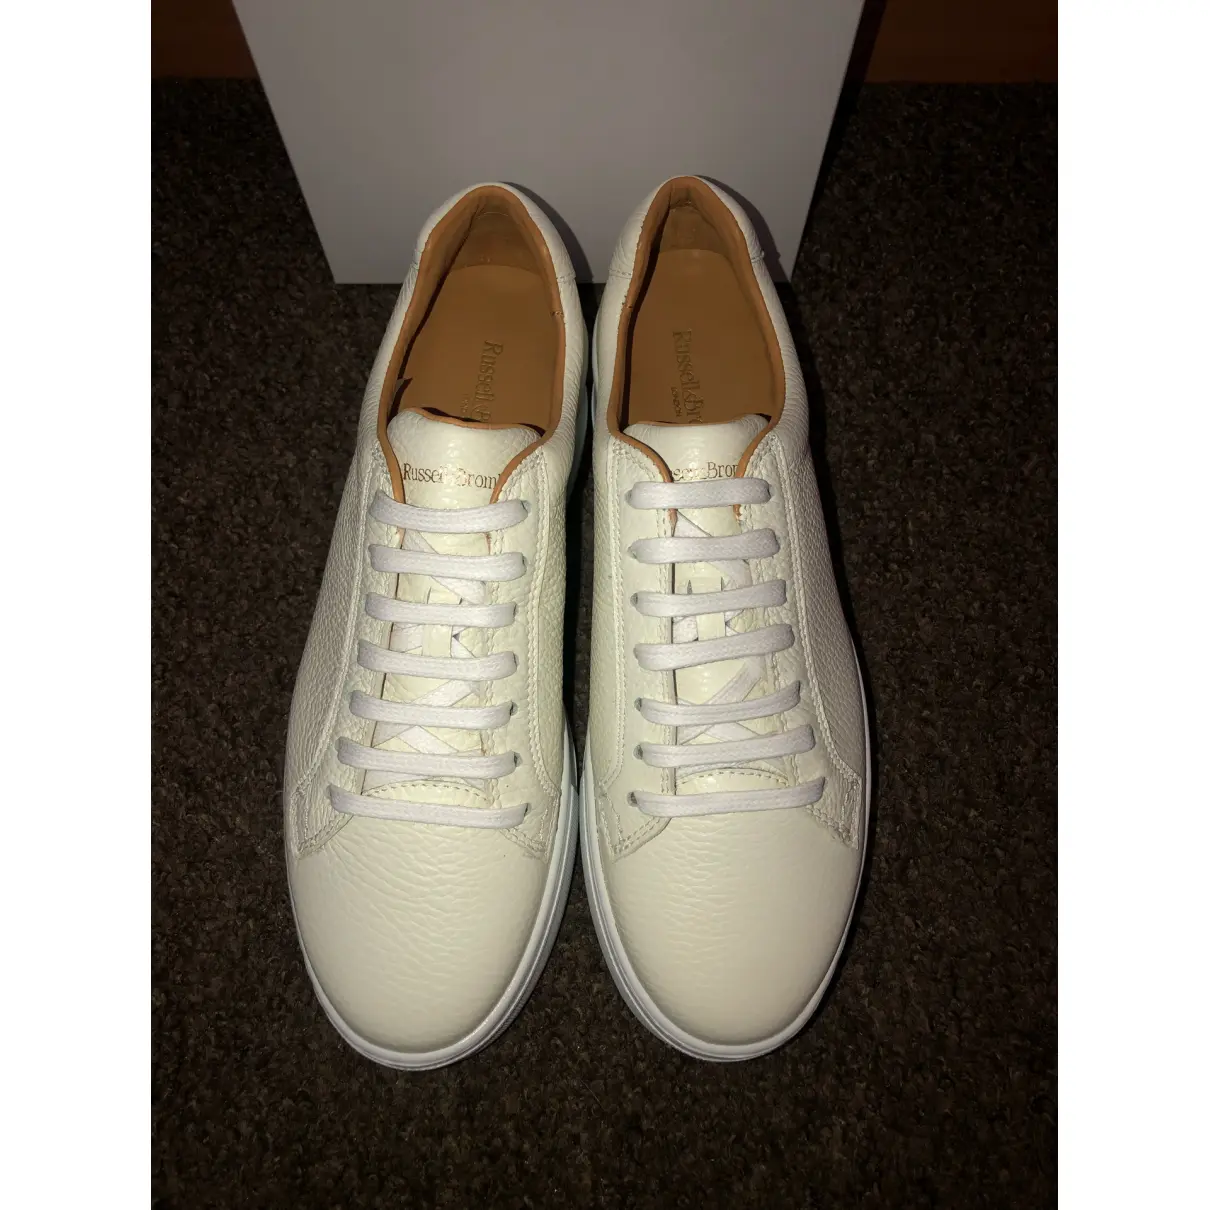 Buy Russell & Bromley Leather trainers online